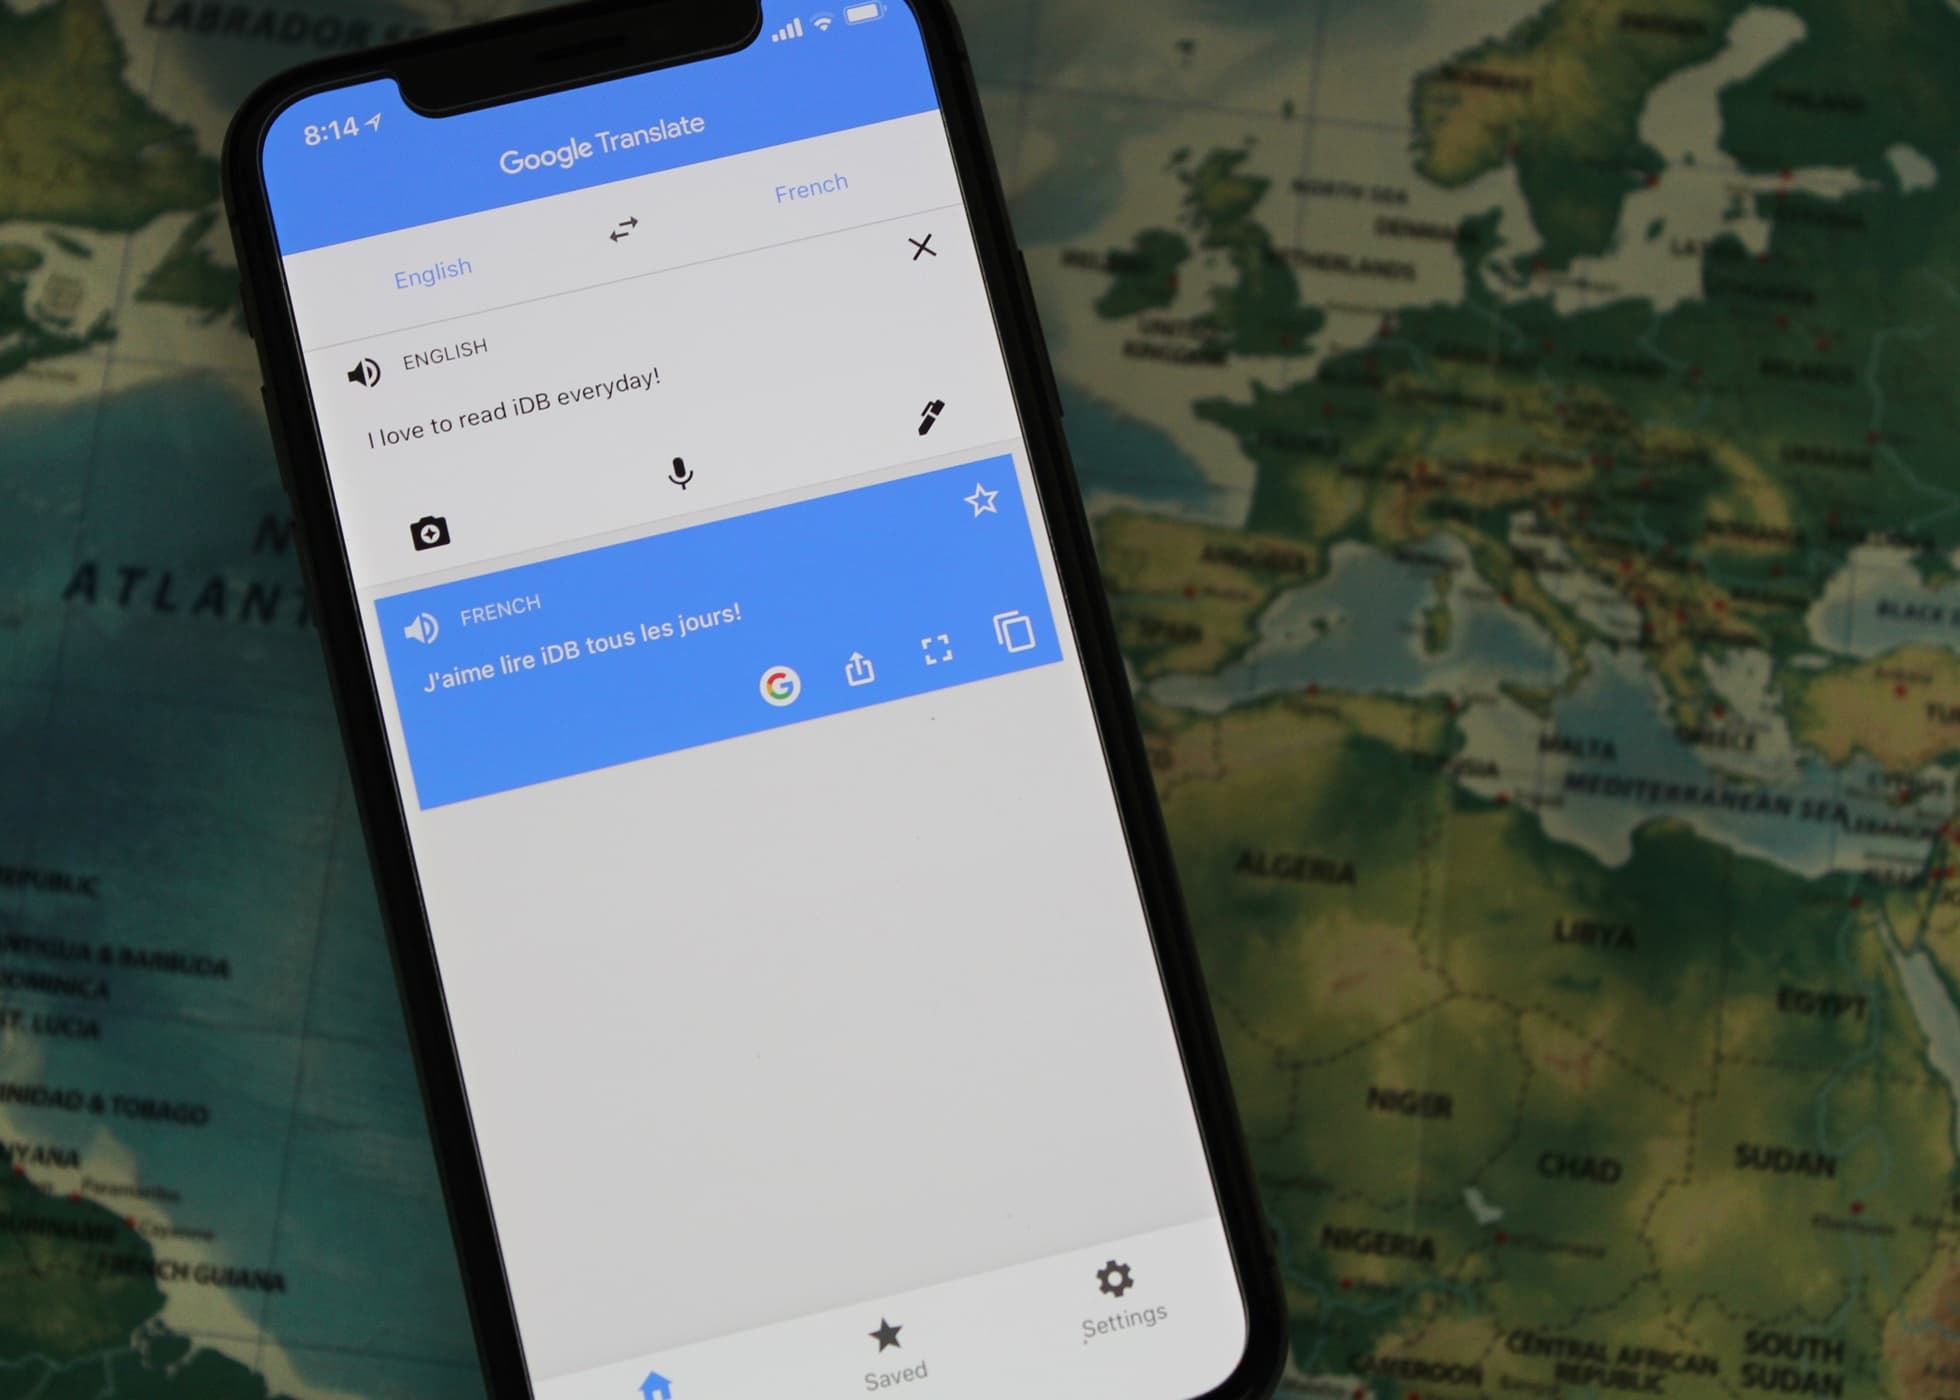 Google Translate offers translations to 100+ languages